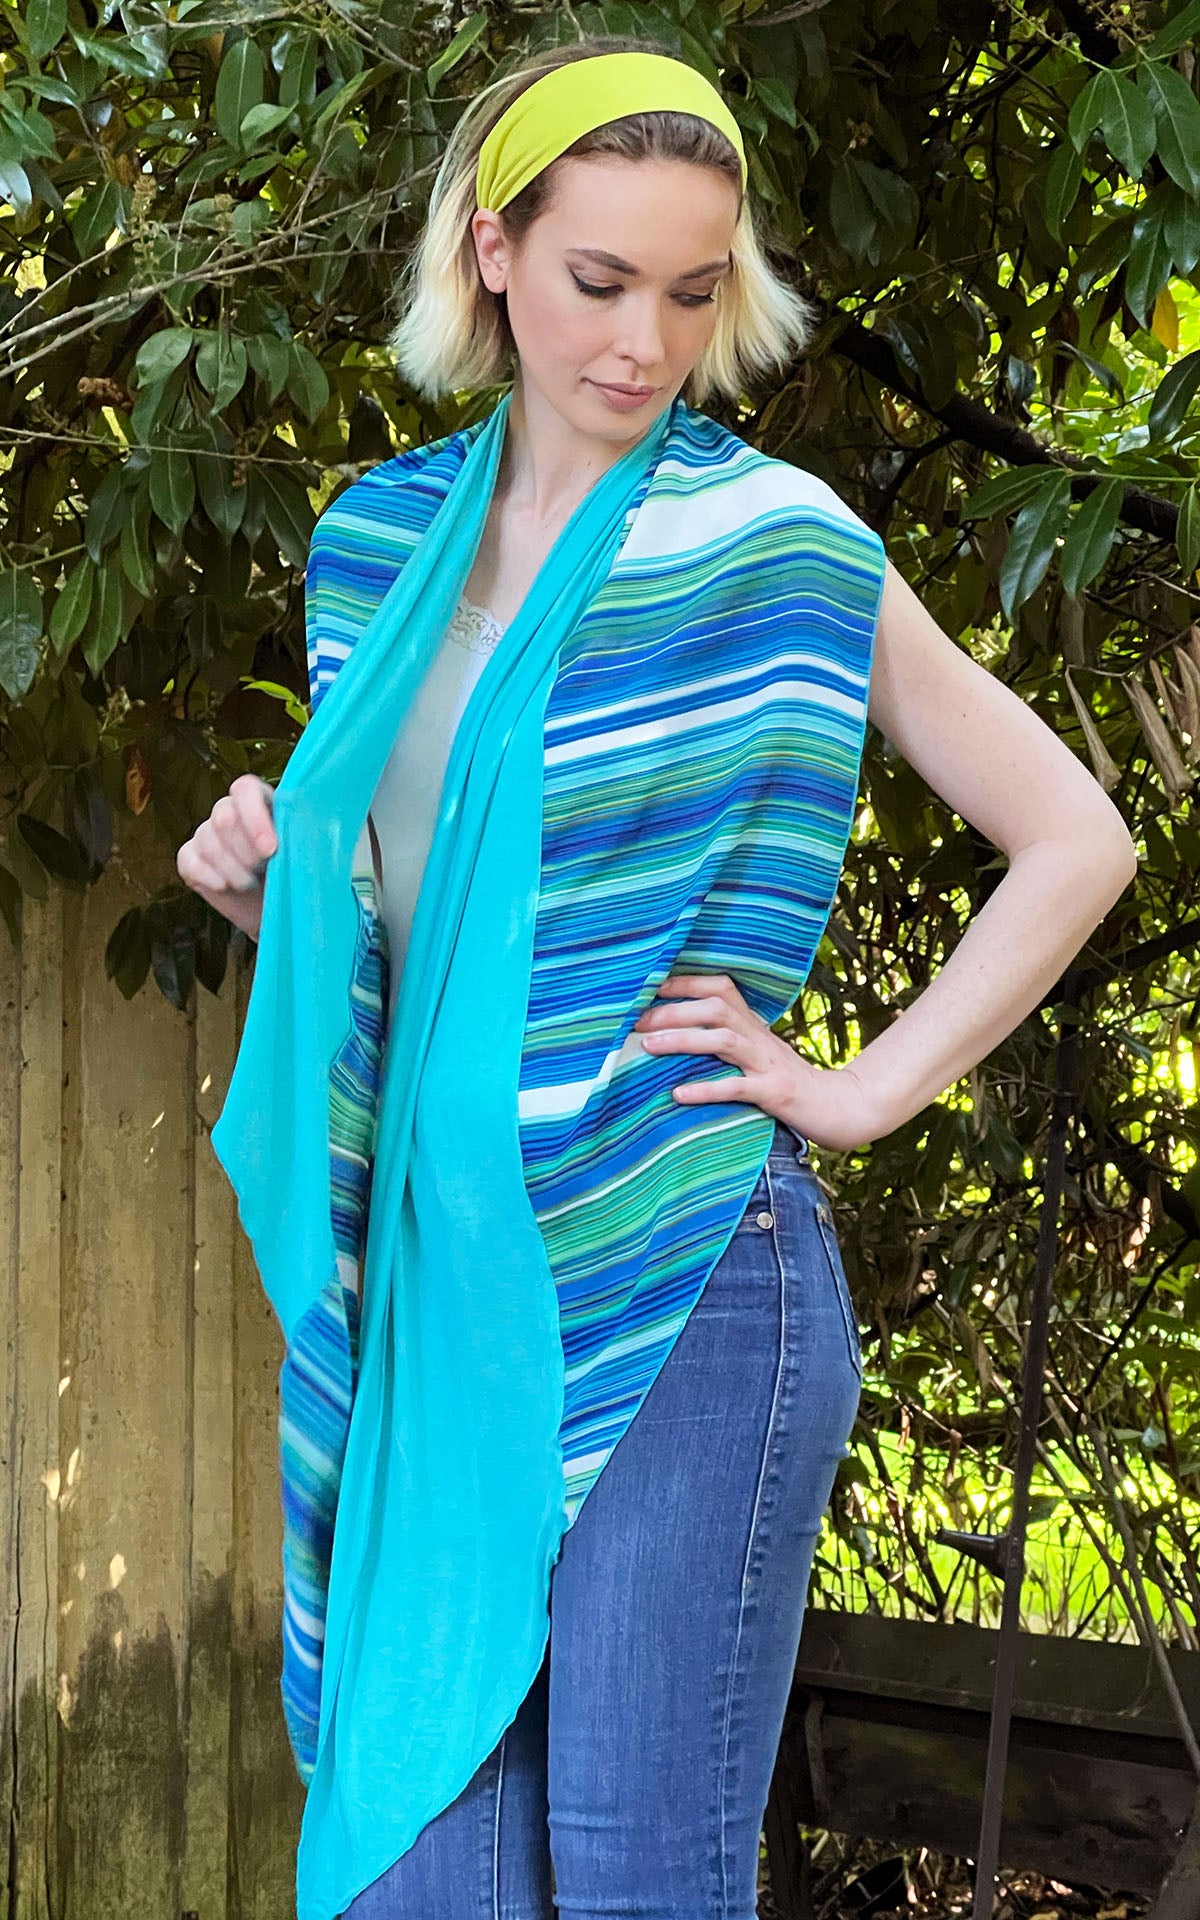 Women standing in front of fence and laurels wearing Handkerchief Scarf, Wrap | Shown in Oceans of Emptiness Jersy knit with Sea Breeze rayon a striped pattern on blues, turquoise, greens, and ivory| Handmade in Seattle WA | Pandemonium Millinery